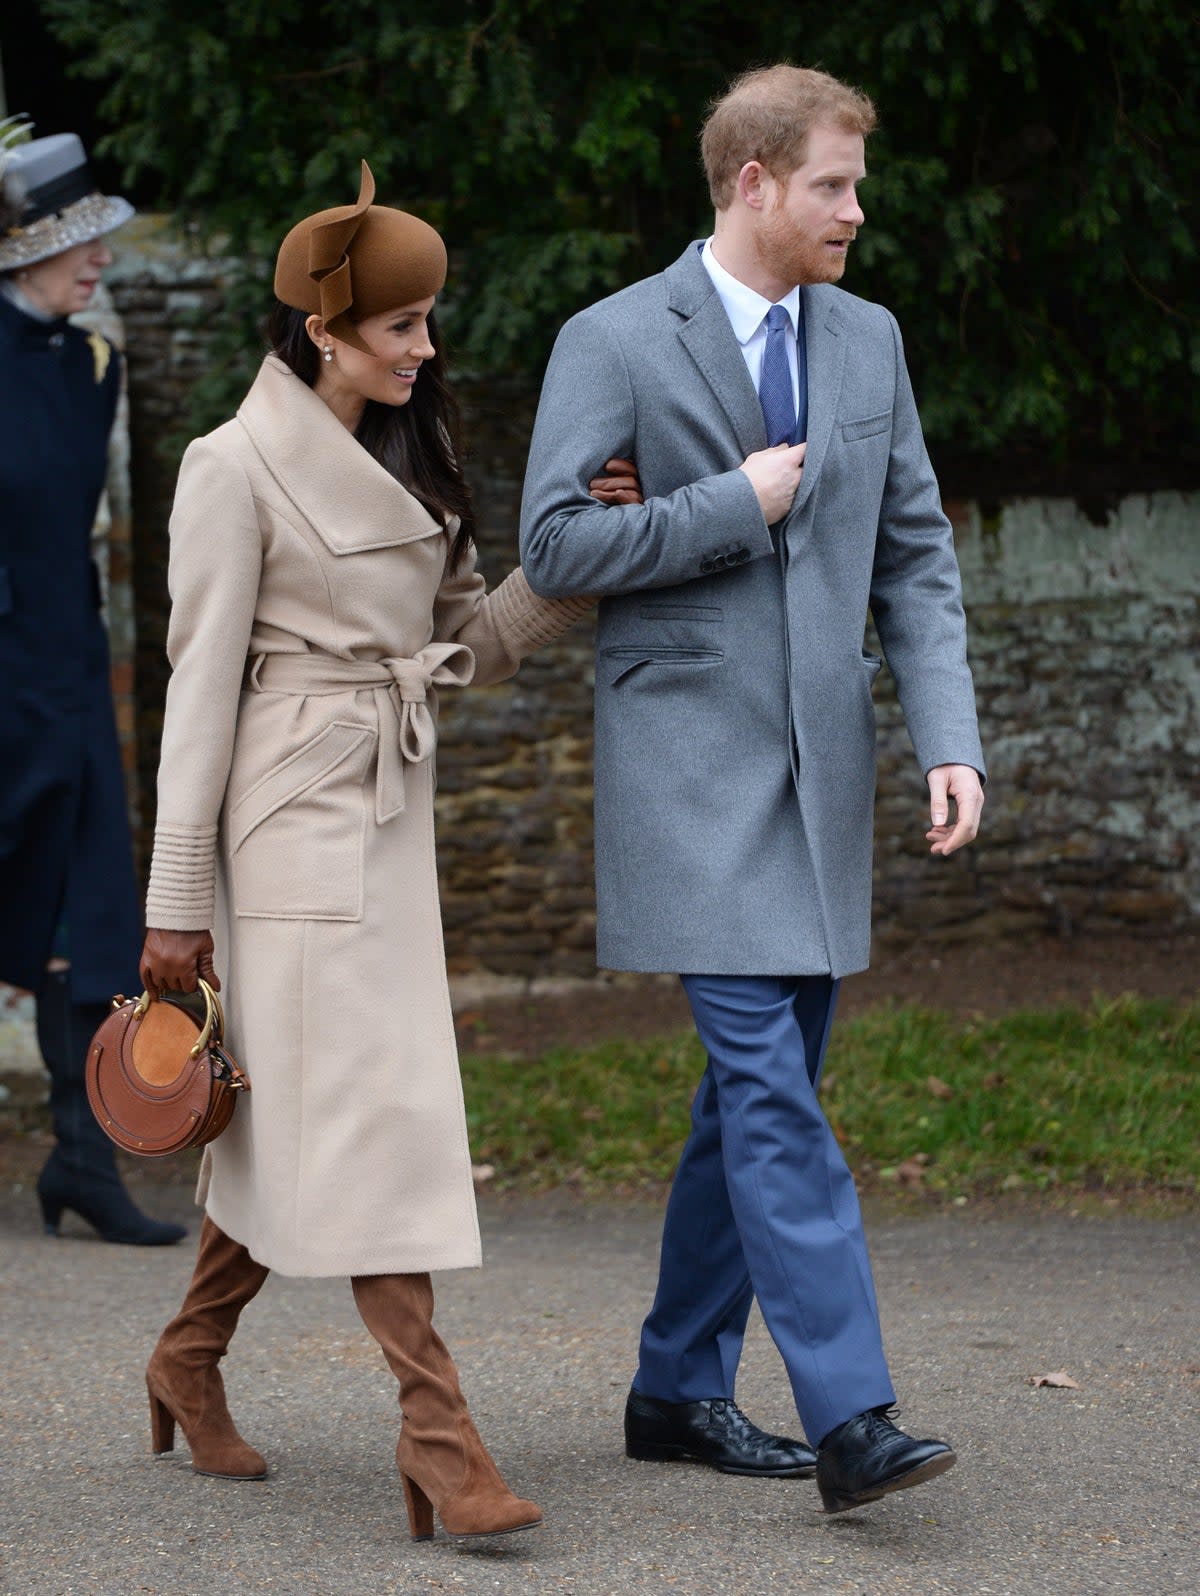 The Duke and Duchess of Sussex leaving the Christmas Day morning church service at St Mary Magdalene Church in Sandringham, photographed in 2017 (PA)